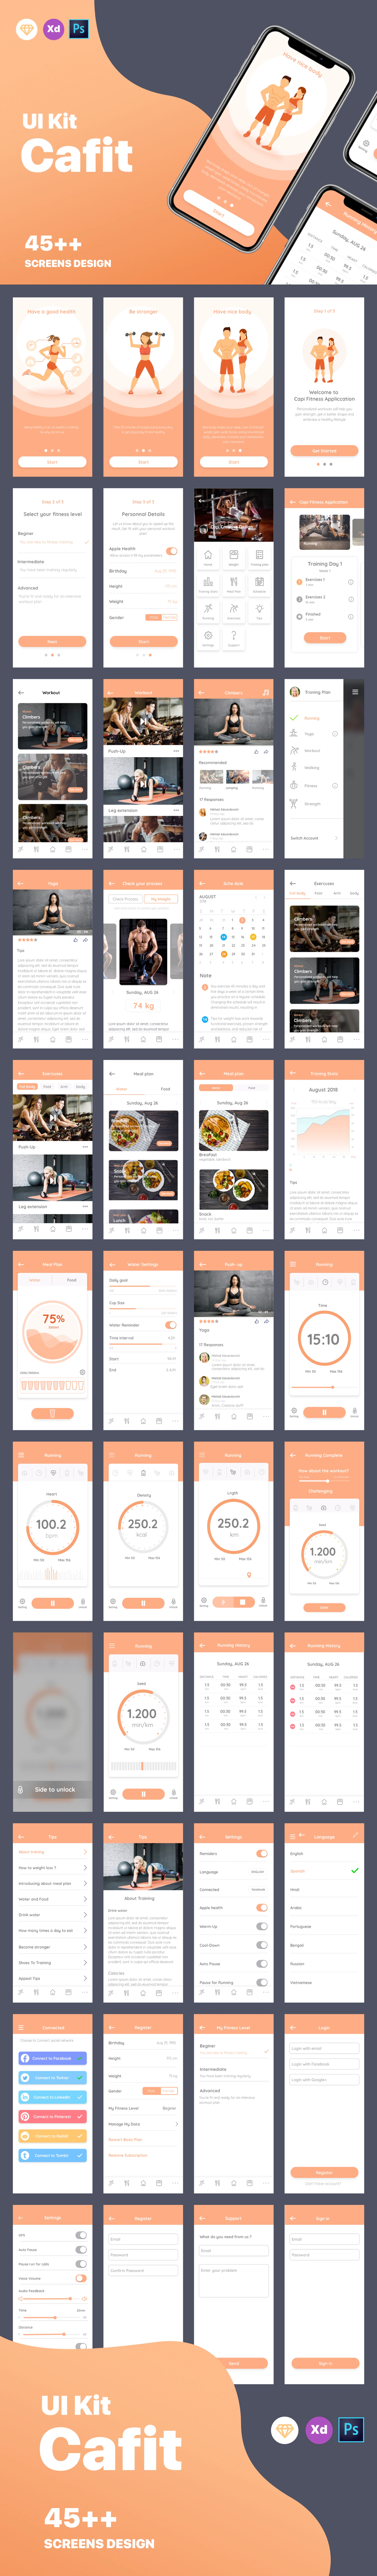 Cafit - Workout UI Kit - This is Cafit – Fitness UI Kit. Amazing UI Kit of premium quality is gonna drive you crazy! — a genuine designer’s ace! Cafit delivers 45+ screens of ultimate value, with hot color versions featured, bring to app more energy.